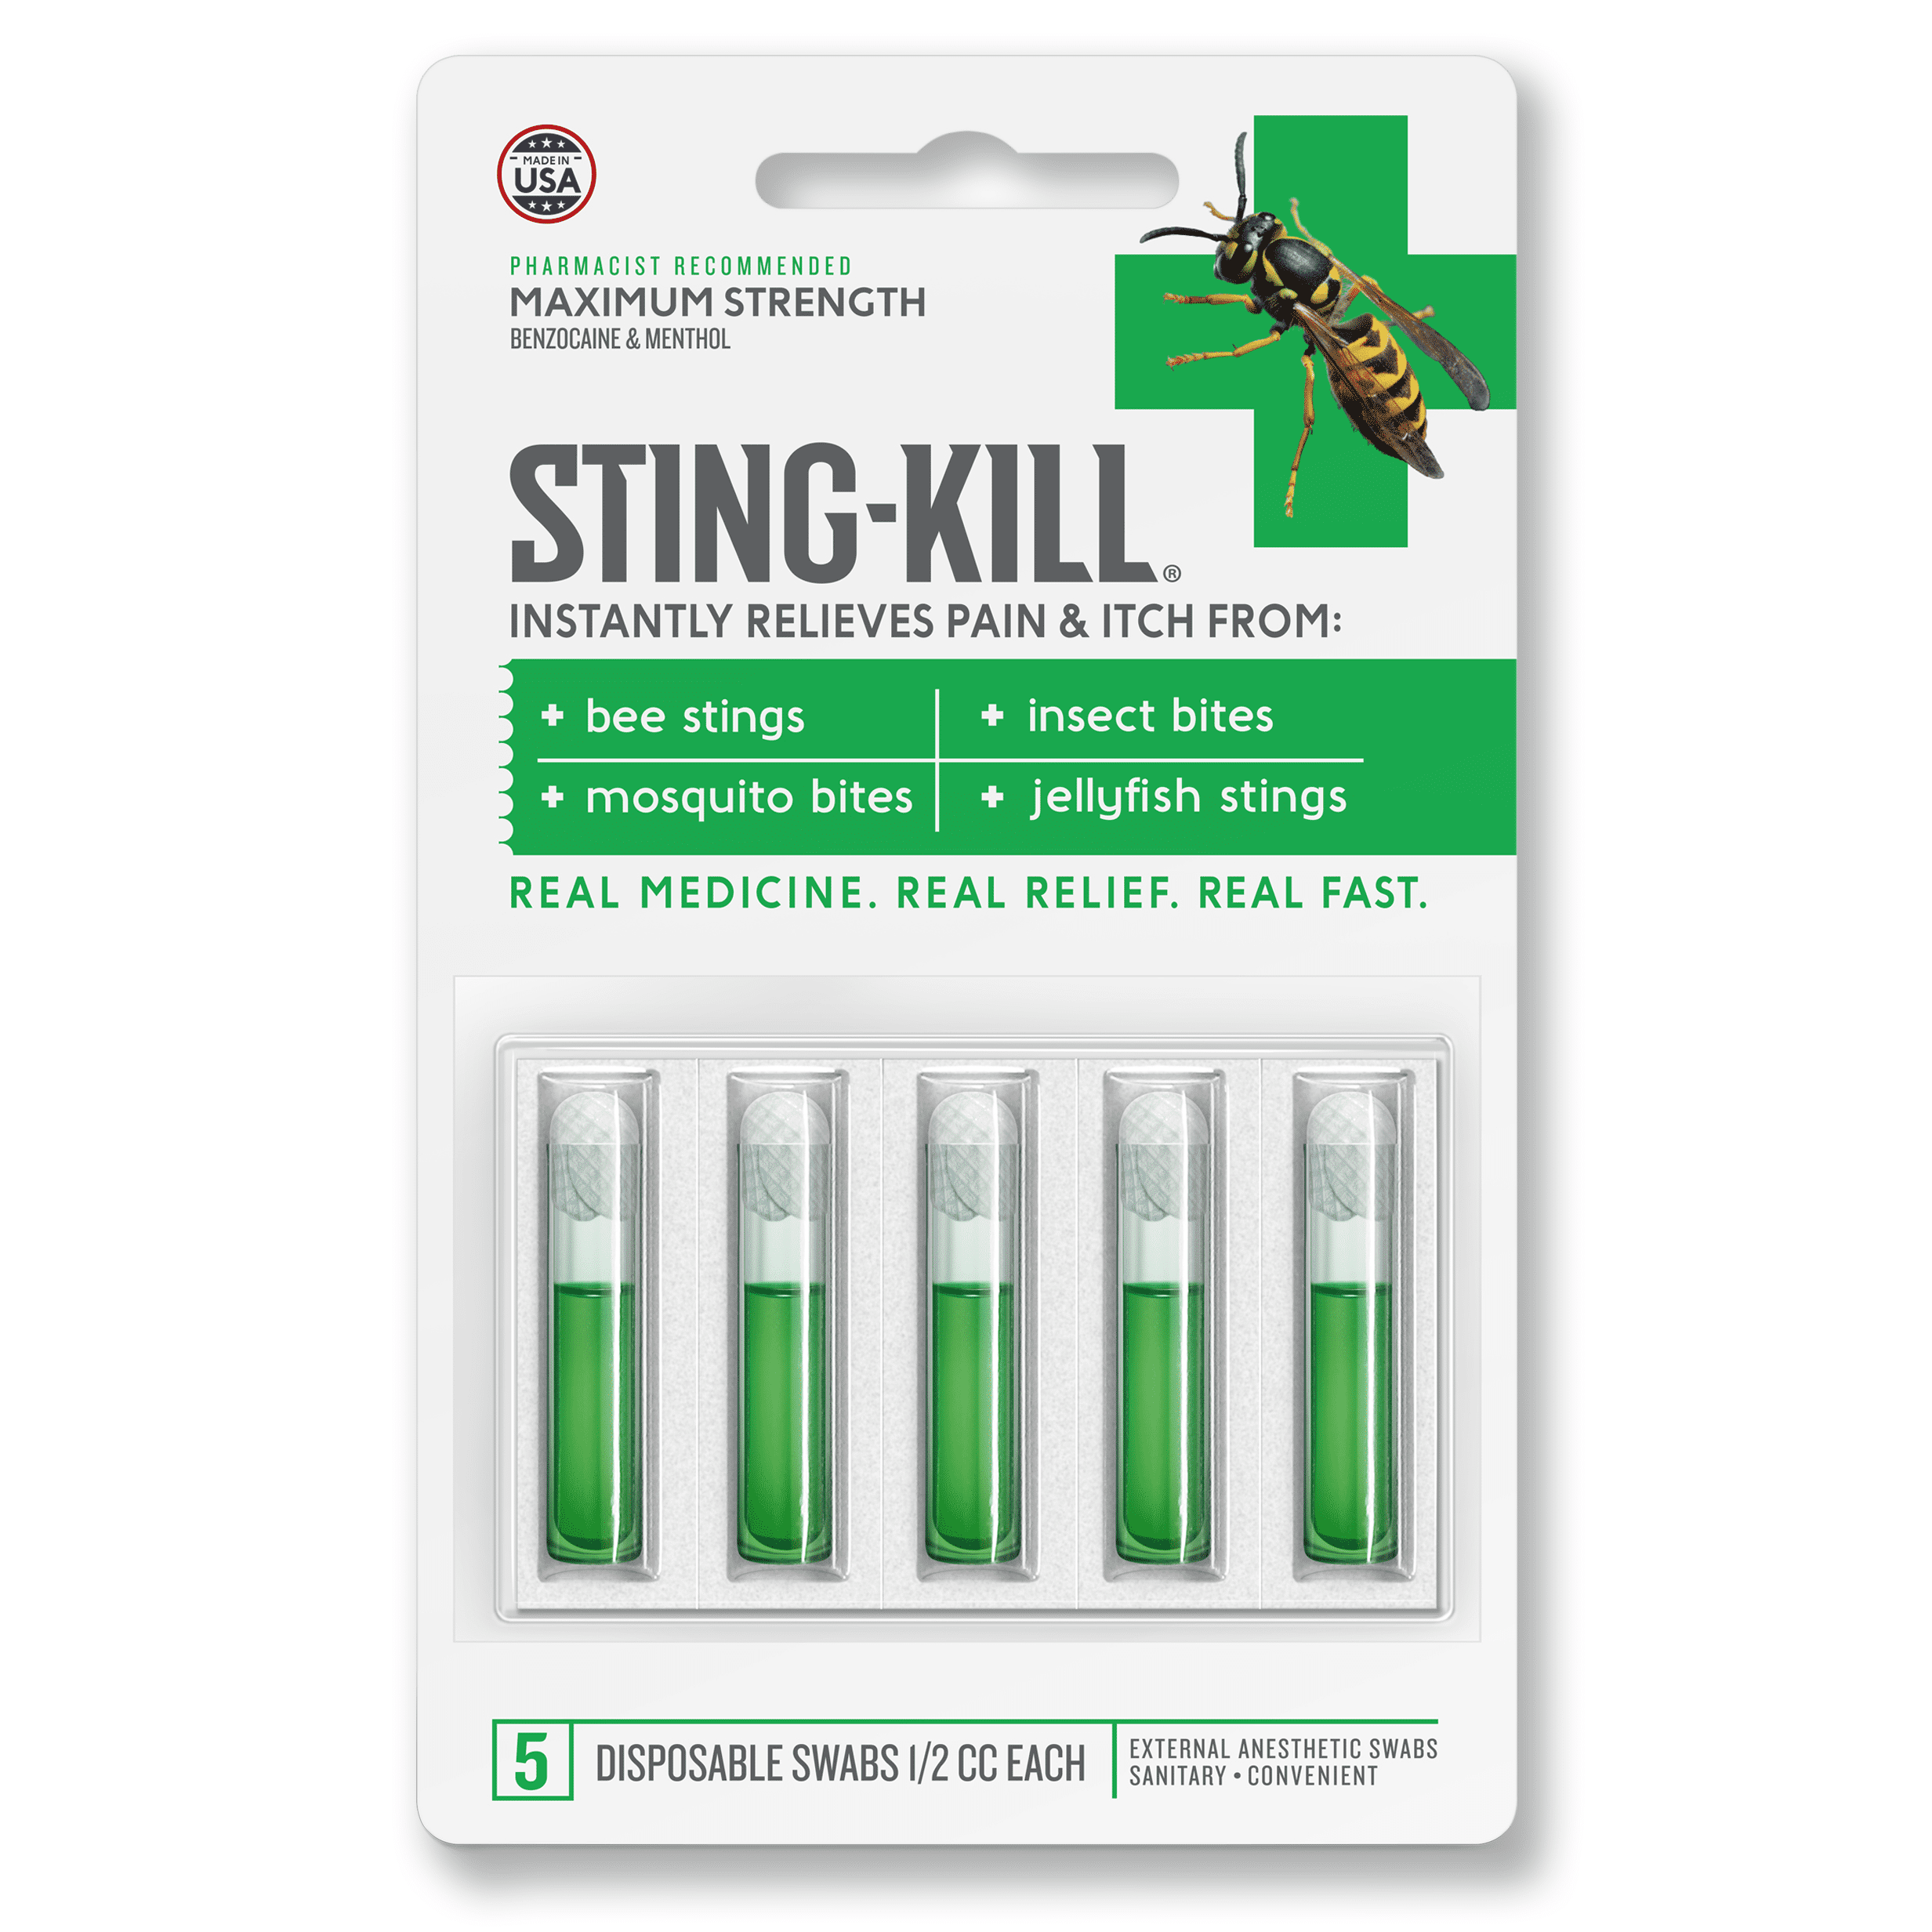 Sting-Kill First Aid Anesthetic Swabs, Instant Pain + Itch Relief From Bee Stings and Bug Bites, 5 Ct